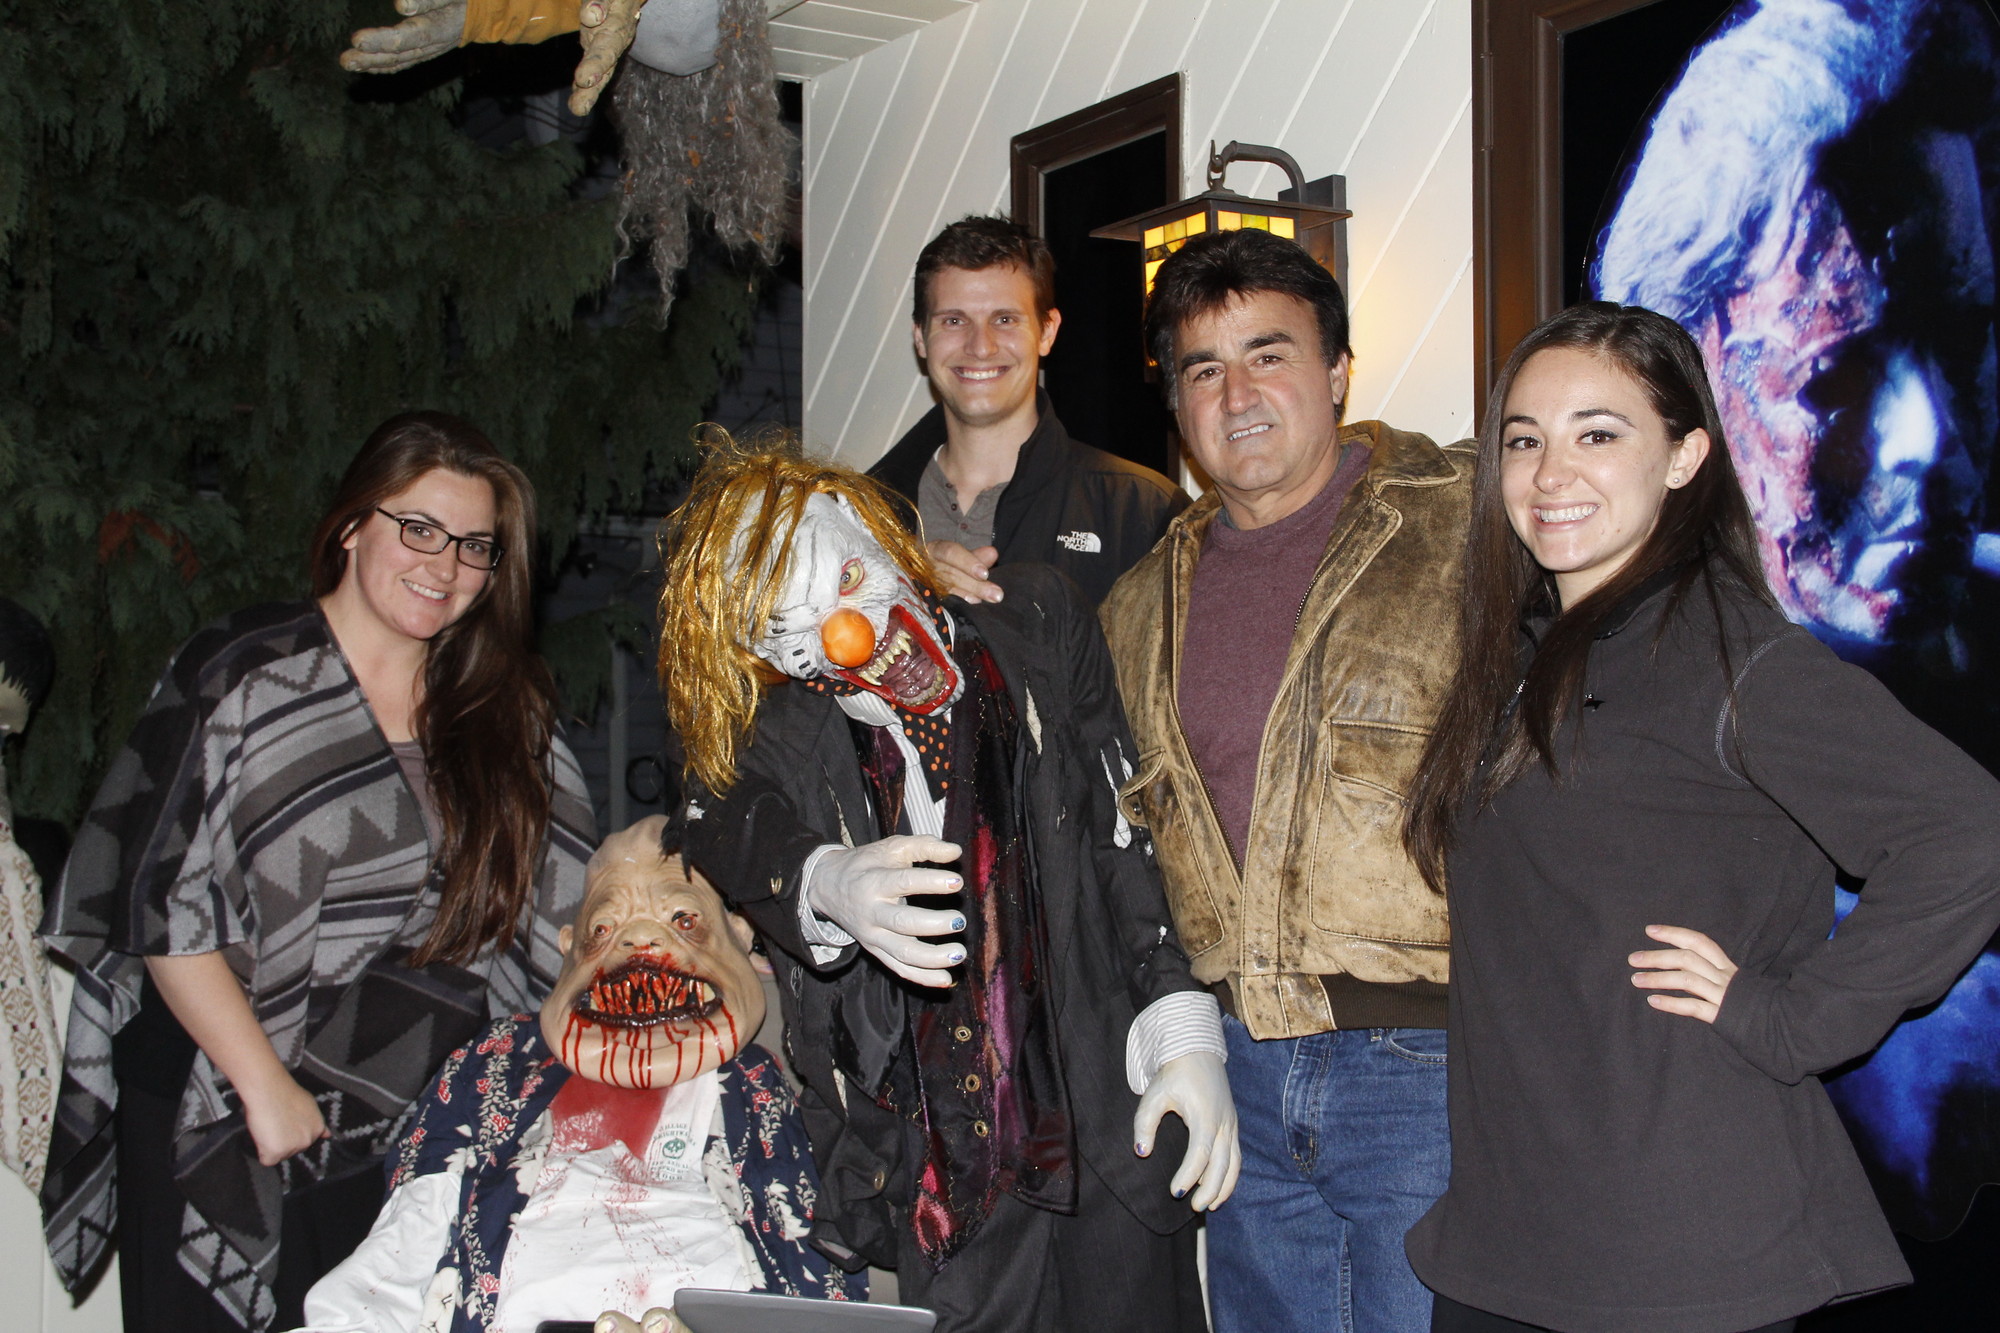 Nicole Gilardi, left, Ryan Franzese and Pat and Allison Gilardi were calm in the presence of two ghouls. The Gilardi family was well-known for their Halloween 
displays when they lived in Rockville Centre and have now resurrected the 
tradition at their new home in Baldwin.